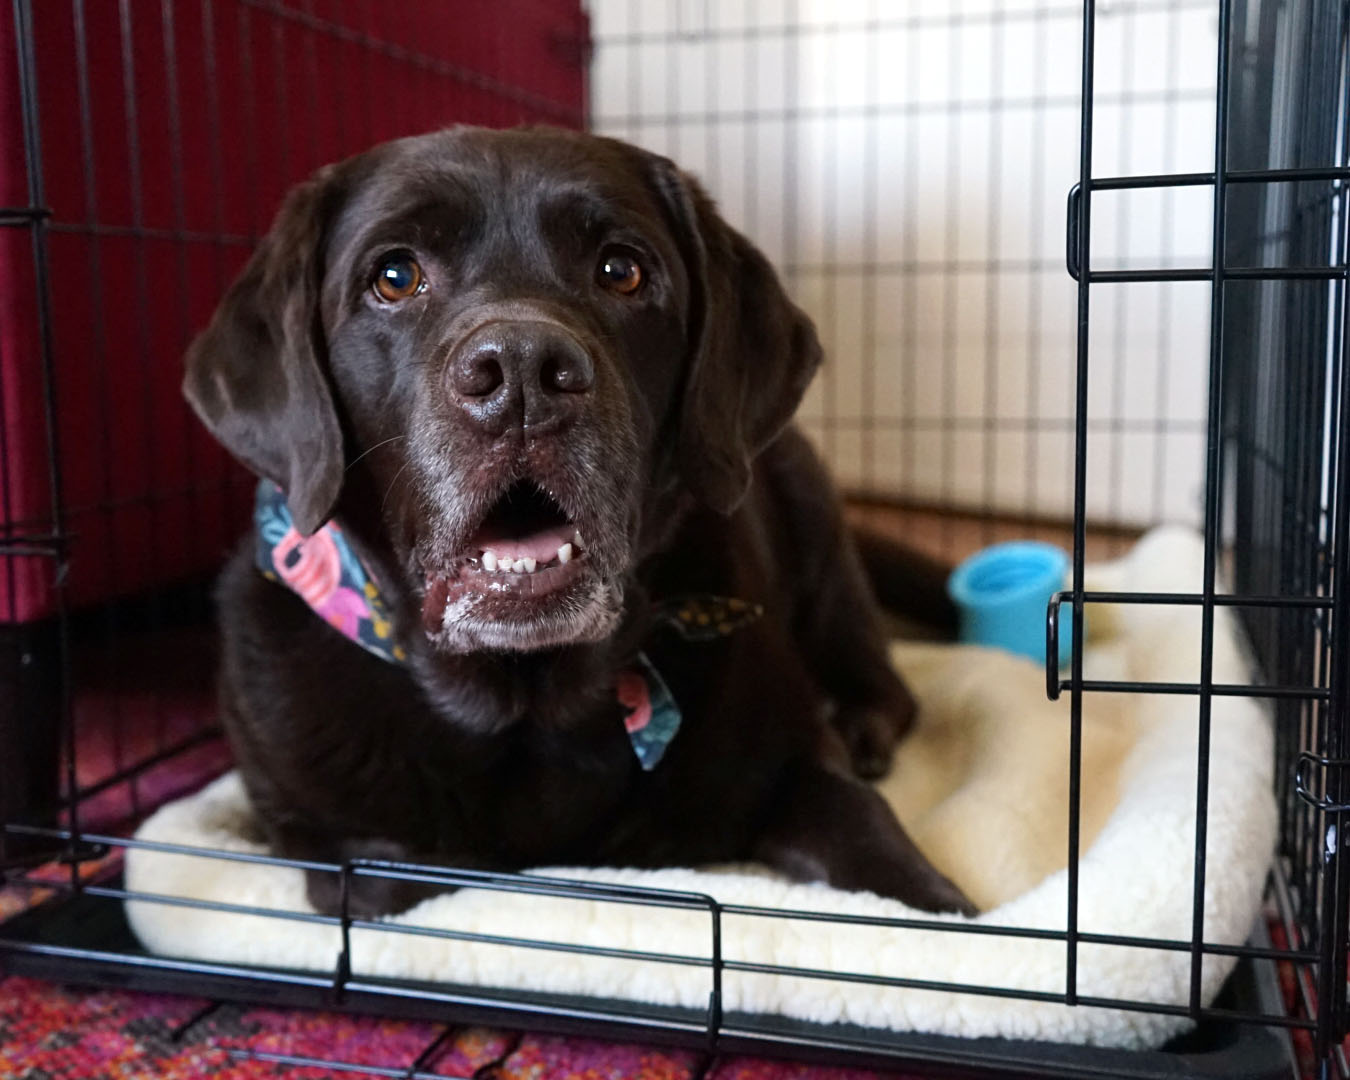 Keeping My Dogs Safe at Home: Pet Gate vs. Crate - Wear Wag Repeat